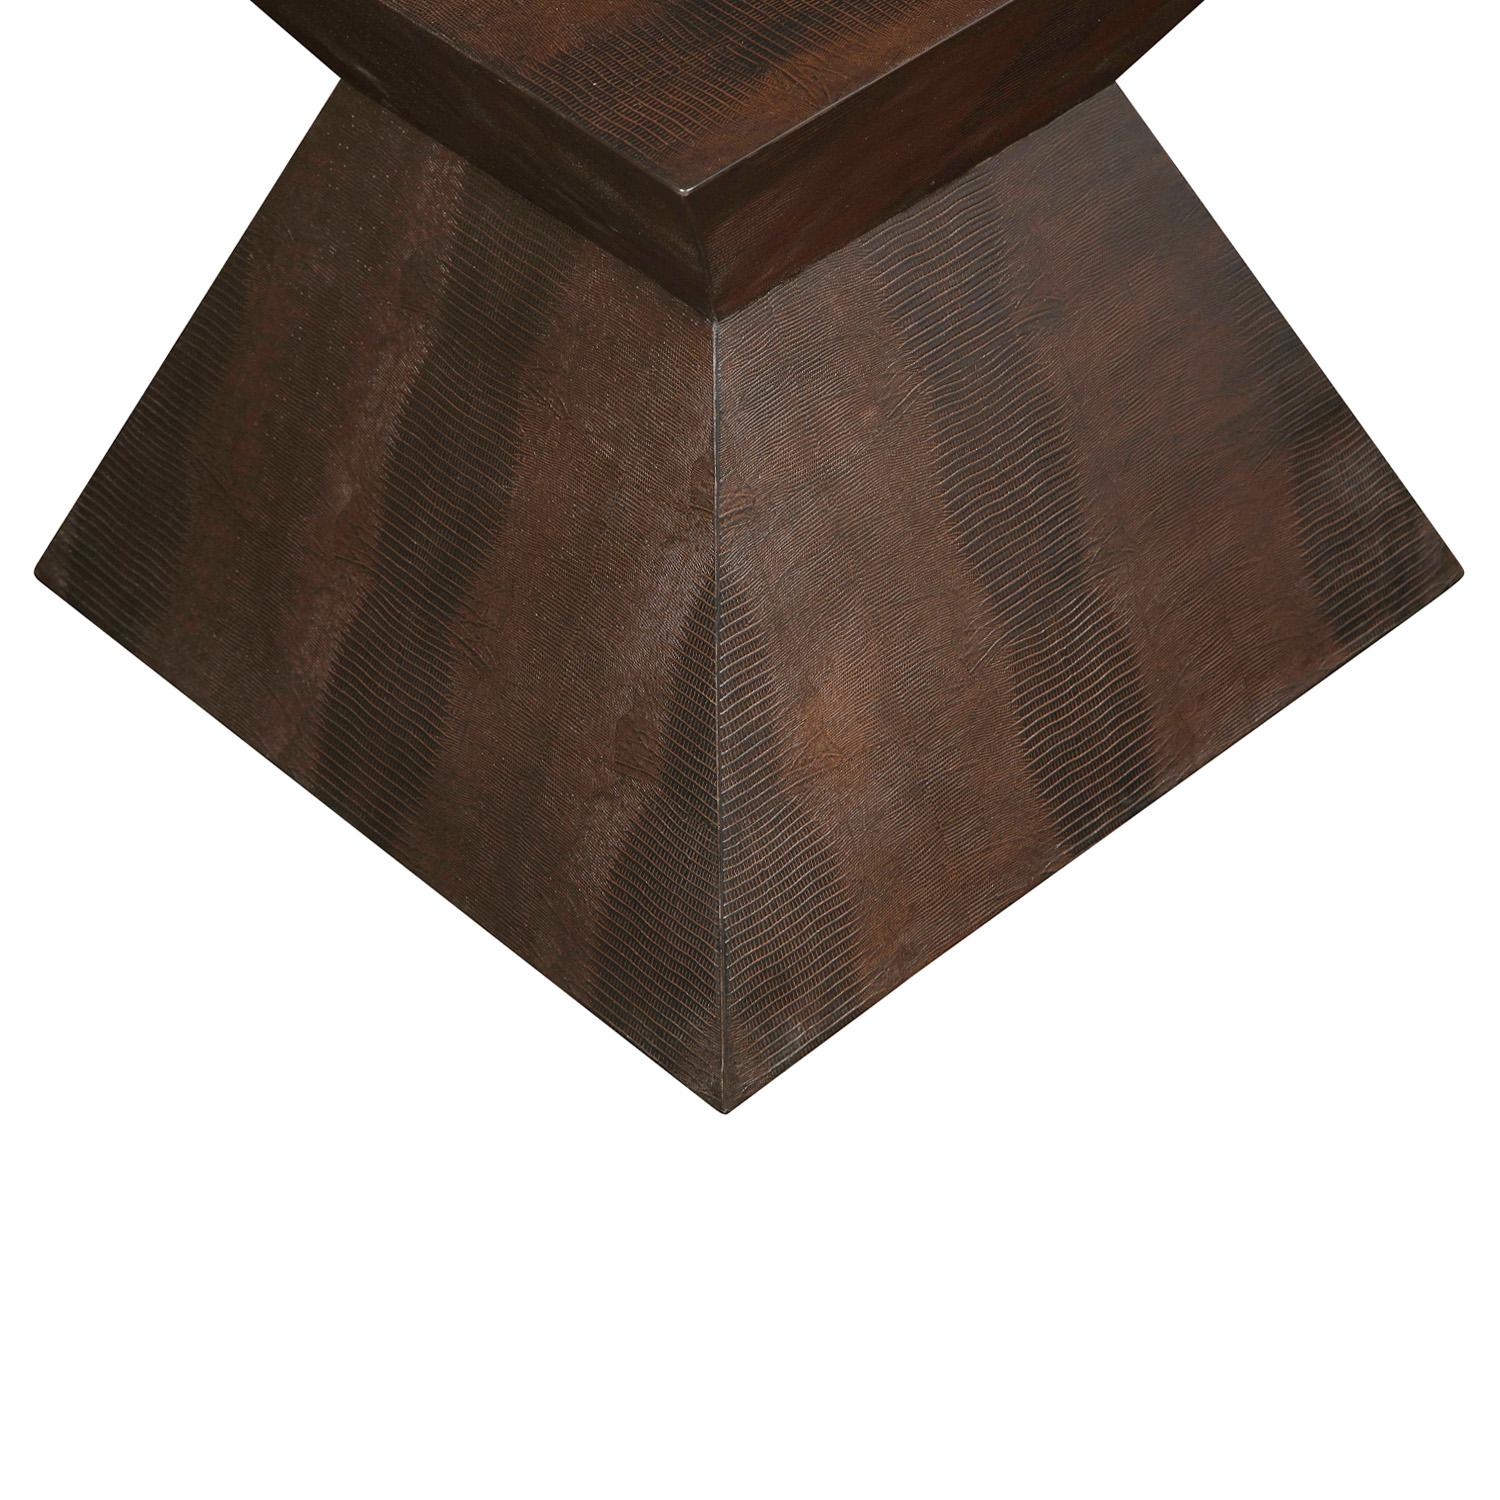 Hand-Crafted Karl Springer Sculptural Side Table in Lizard Embossed Leather, 1980s